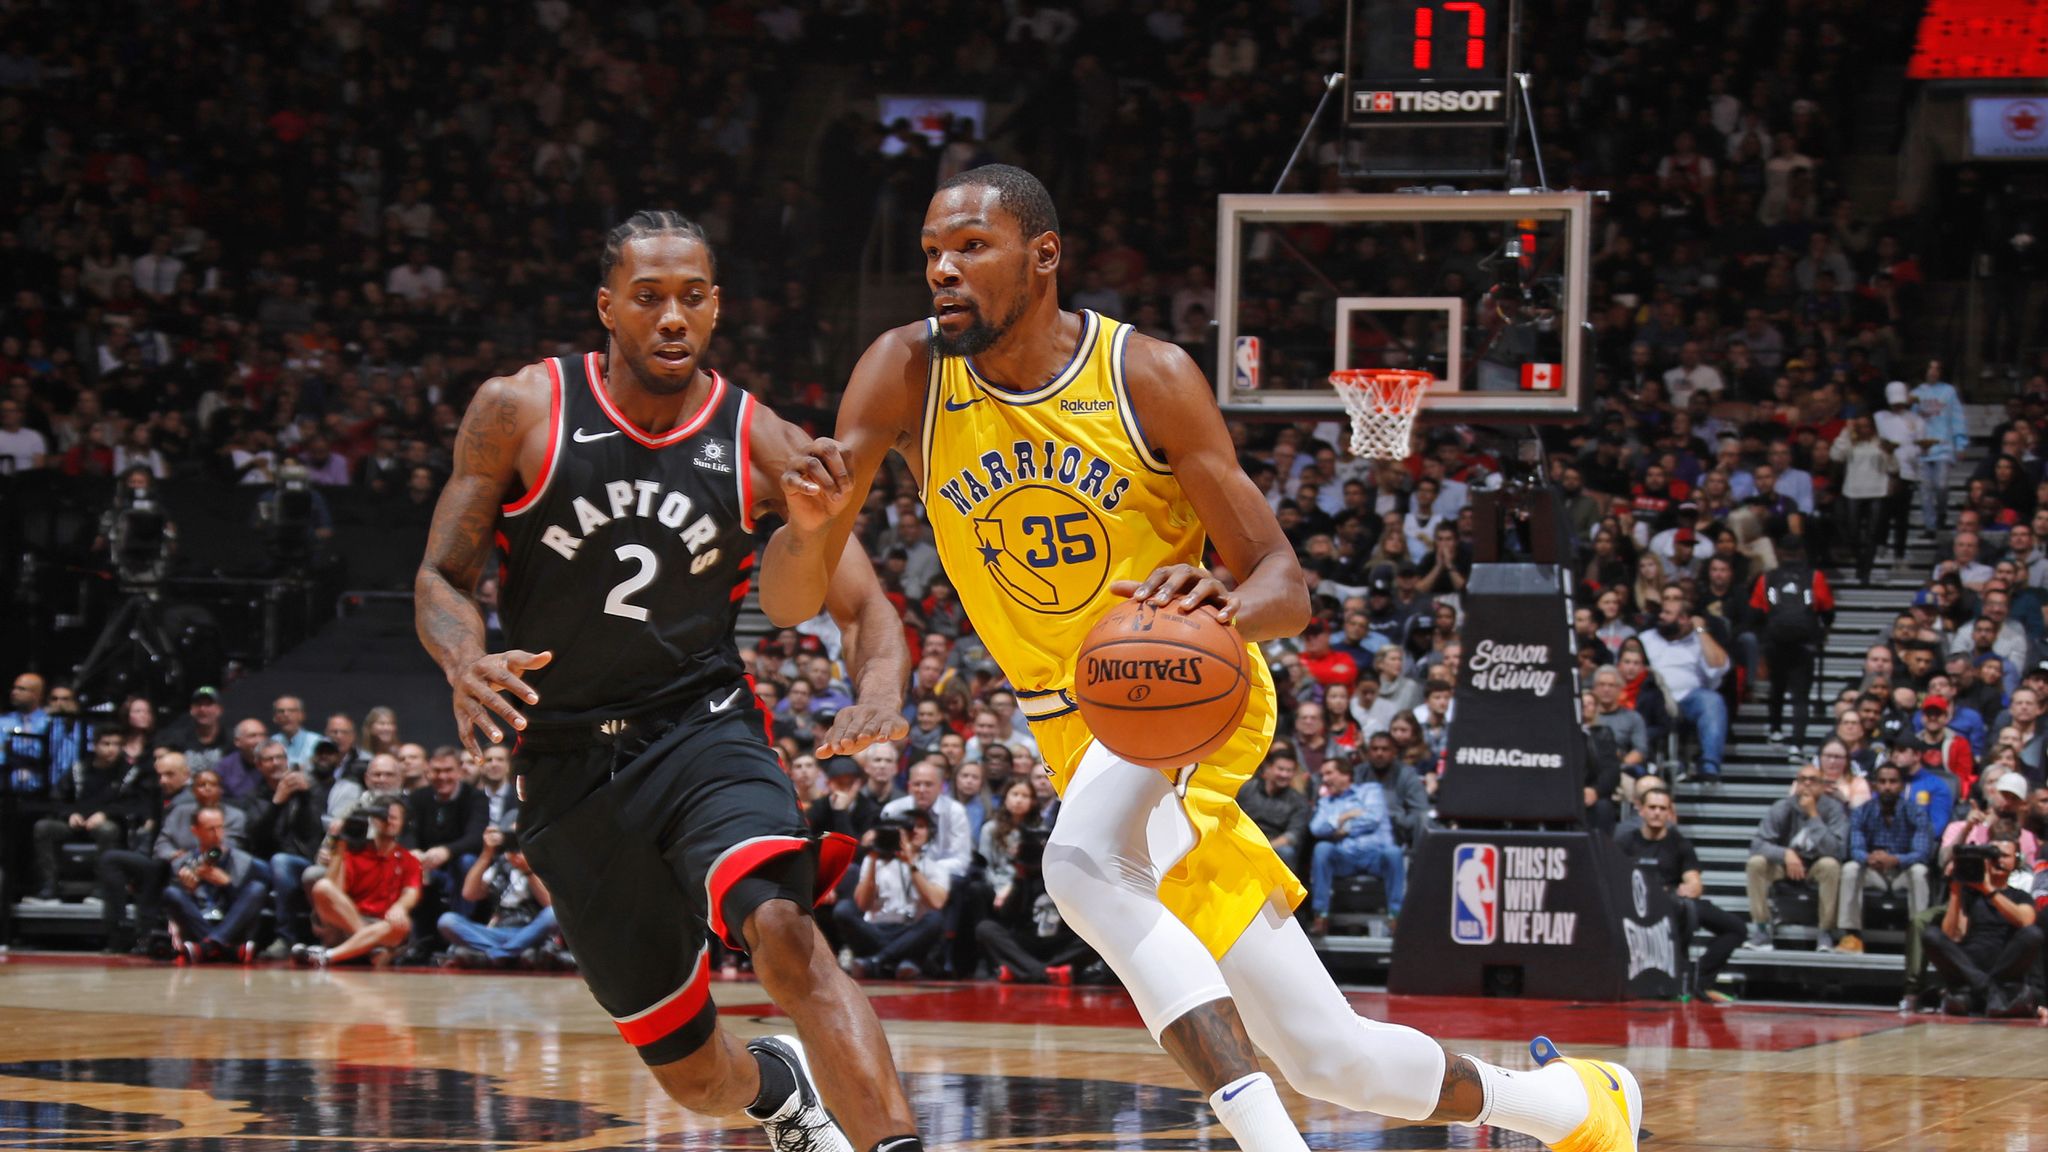 Durant: I wanted to play for the Raptors